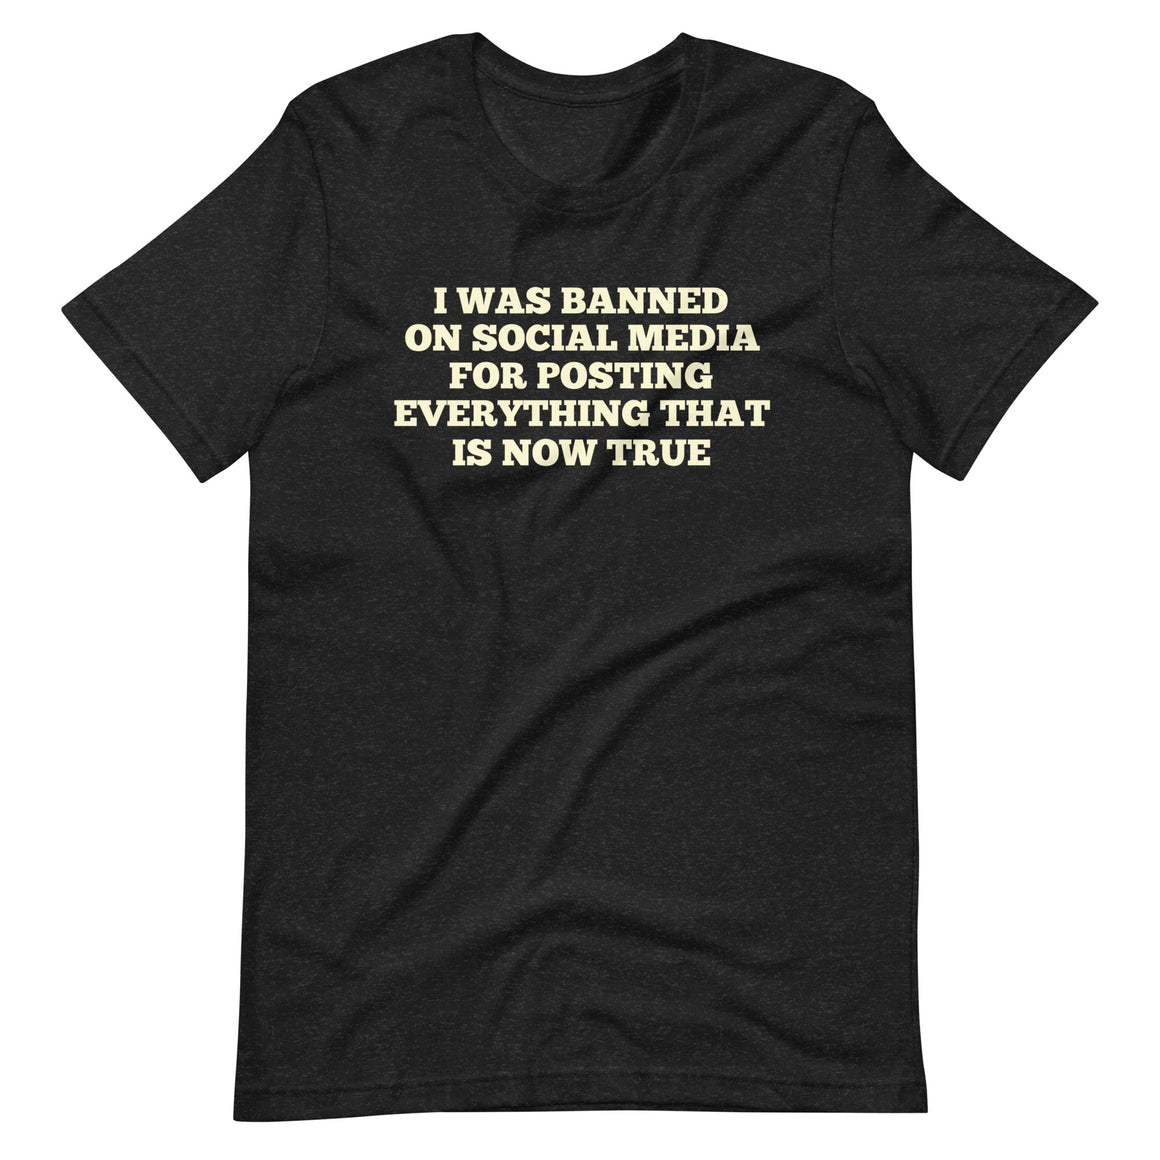 I Was Banned on Social Media for Posting Everything That is Now True Shirt by Libertarian Country